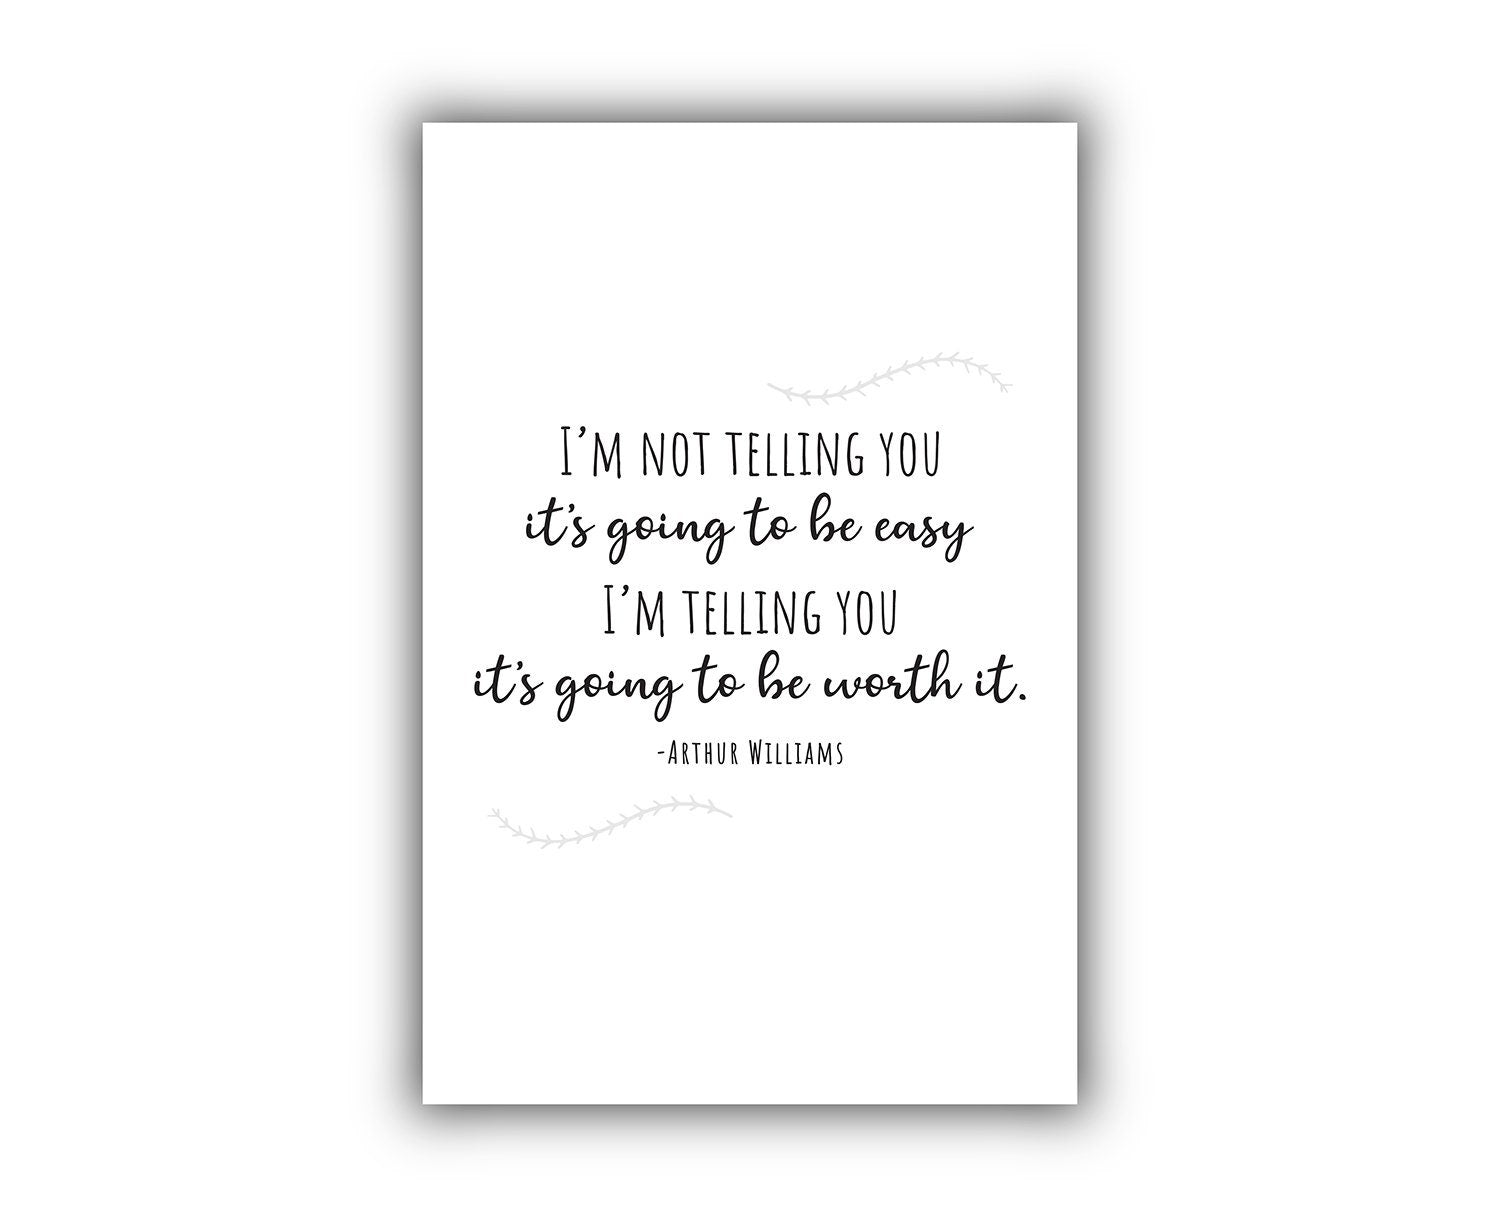 Arthur Williams Quote Poster print, Home wall art, Quote prints, Motivational quotes, Entrepreneur Print, Inspirational Quotes About Life